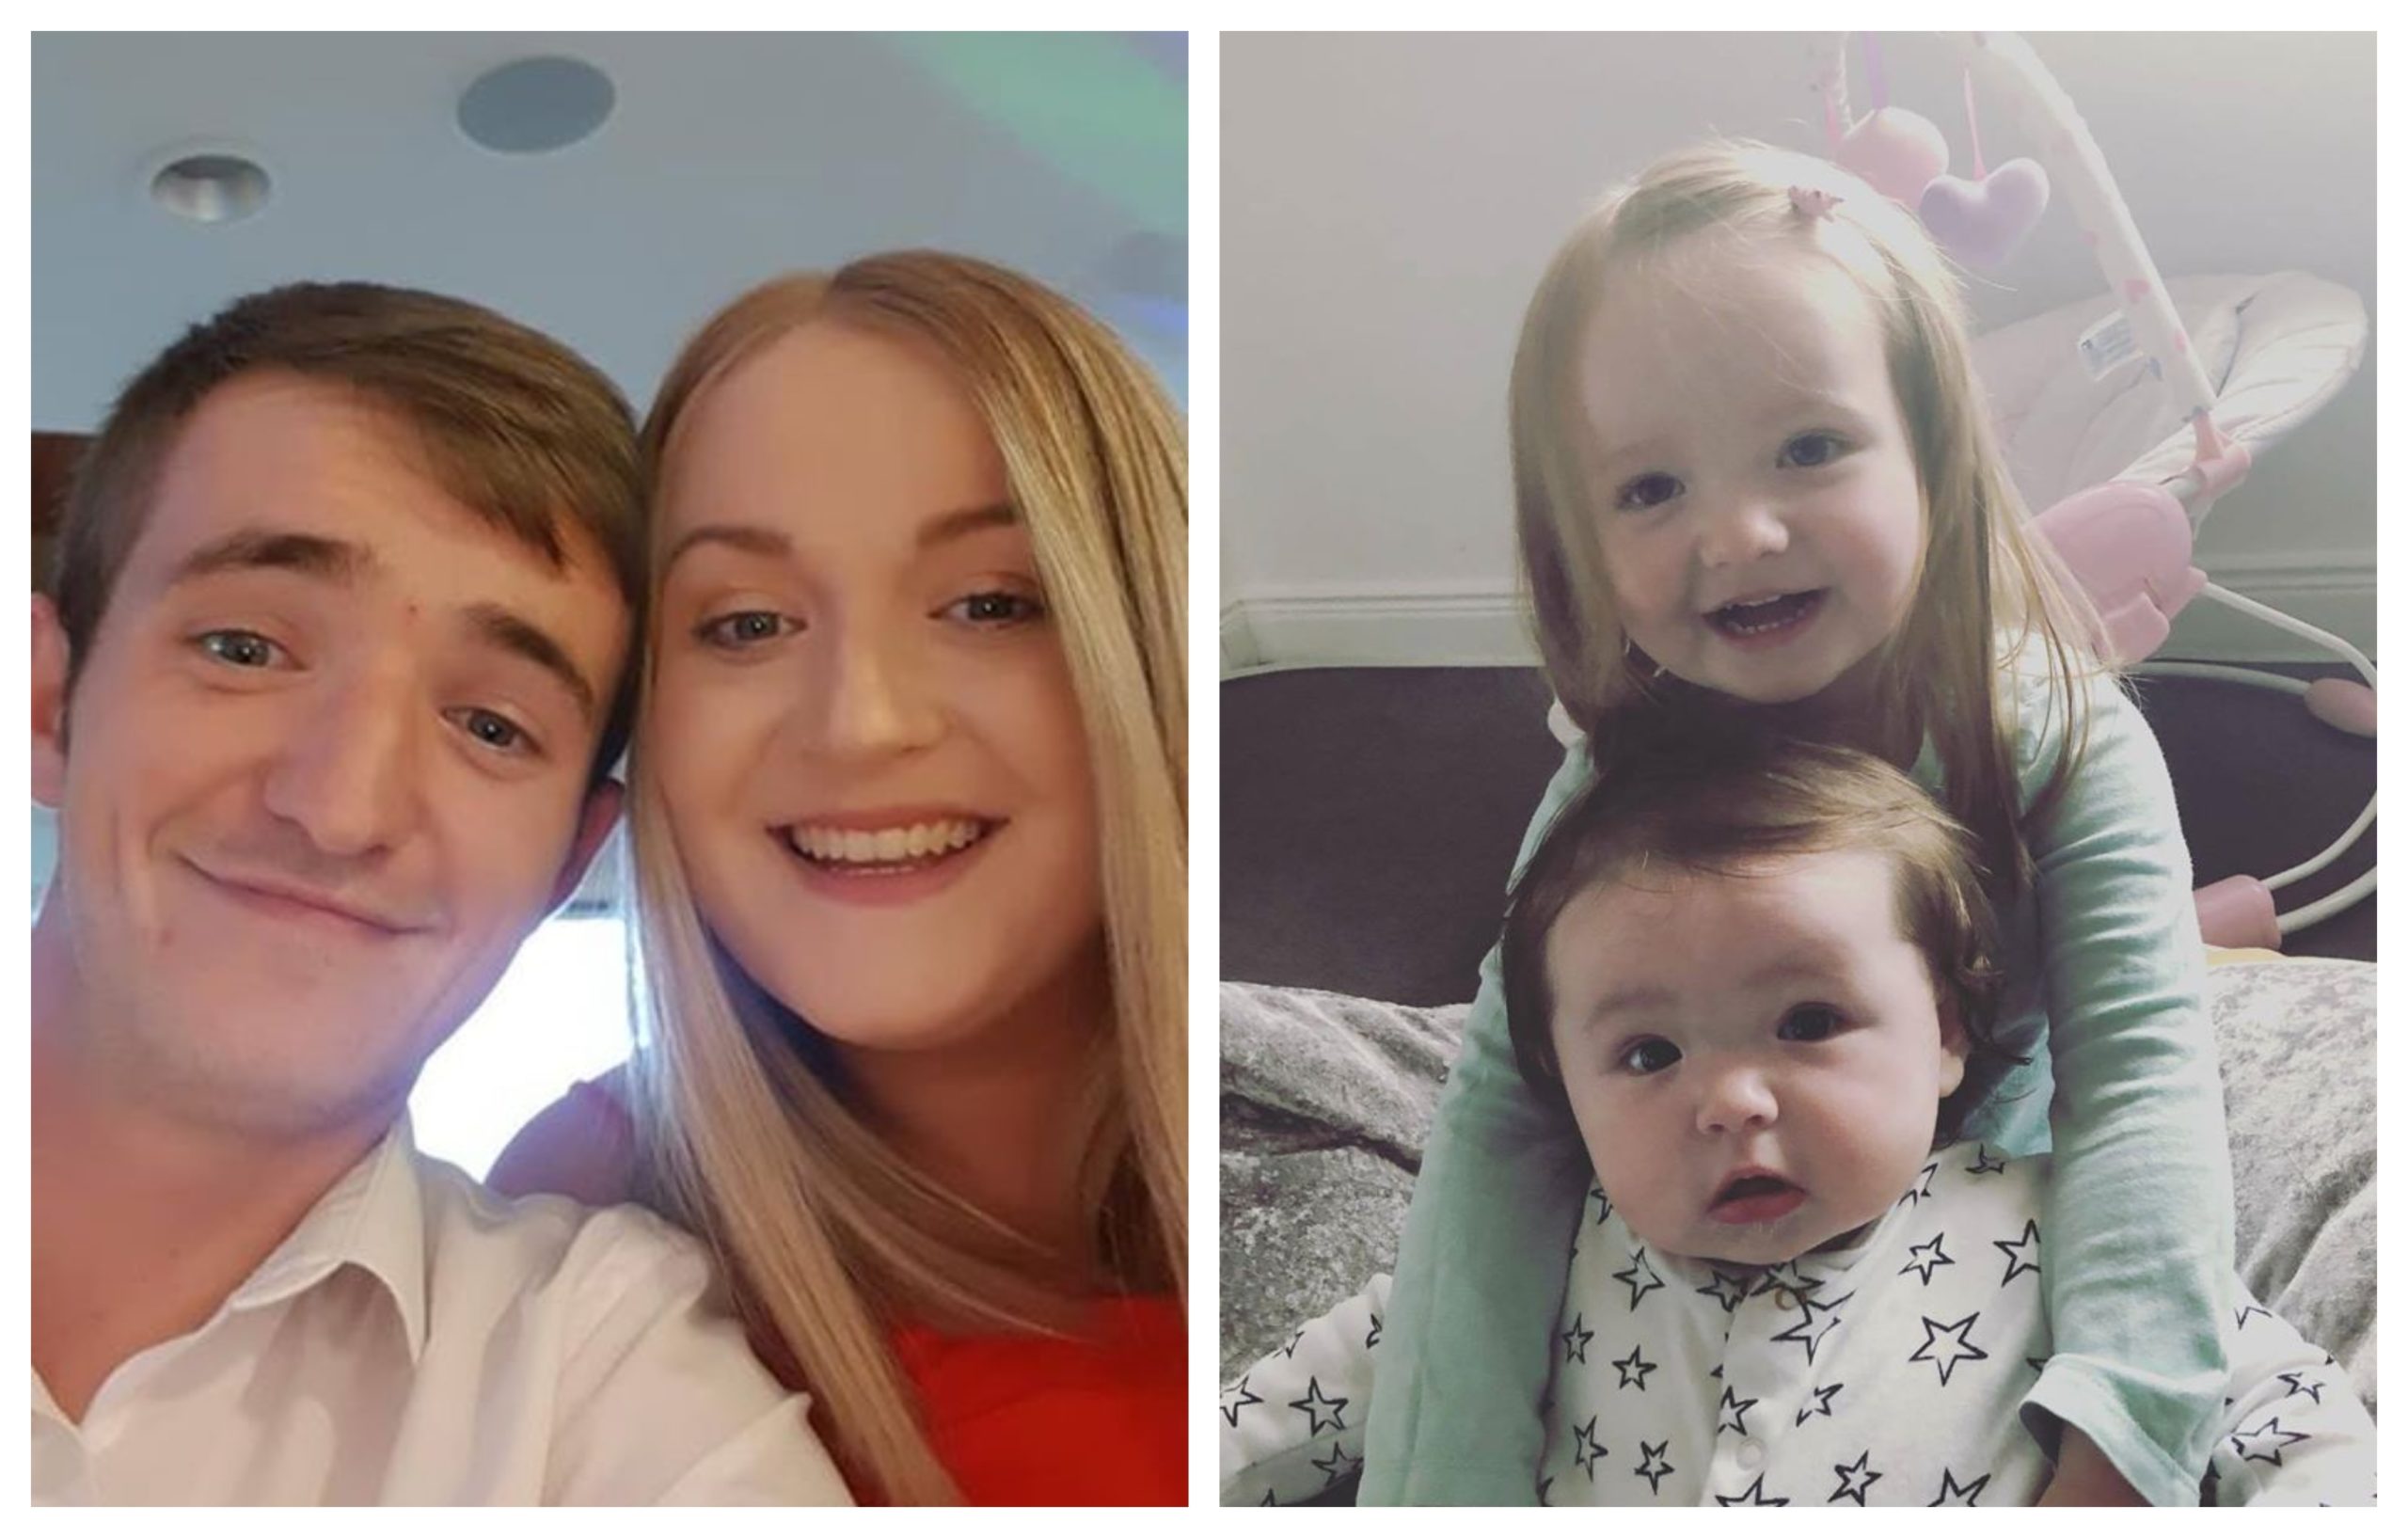 Parents Rhys and Gemma Cousin were killed in the crash with three-year-old Peyton and sister Heidi, aged one year